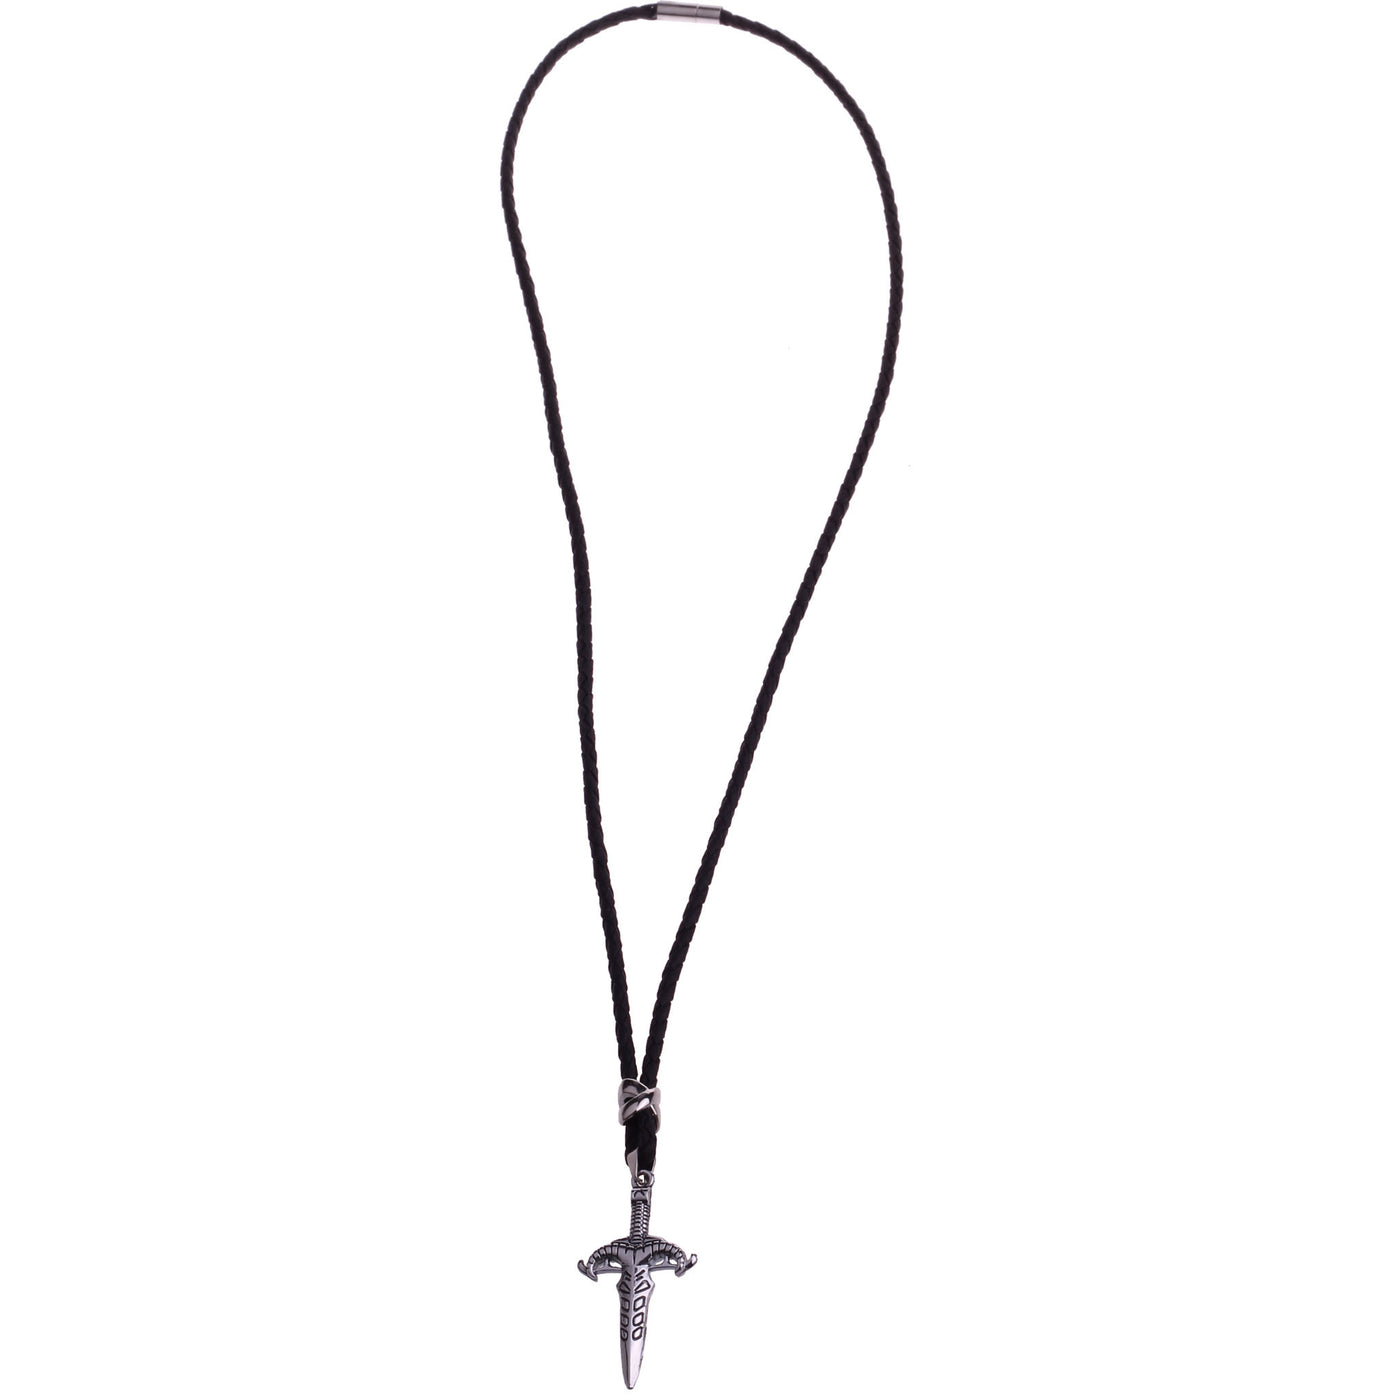 SWORD LEATHER NECKLACE